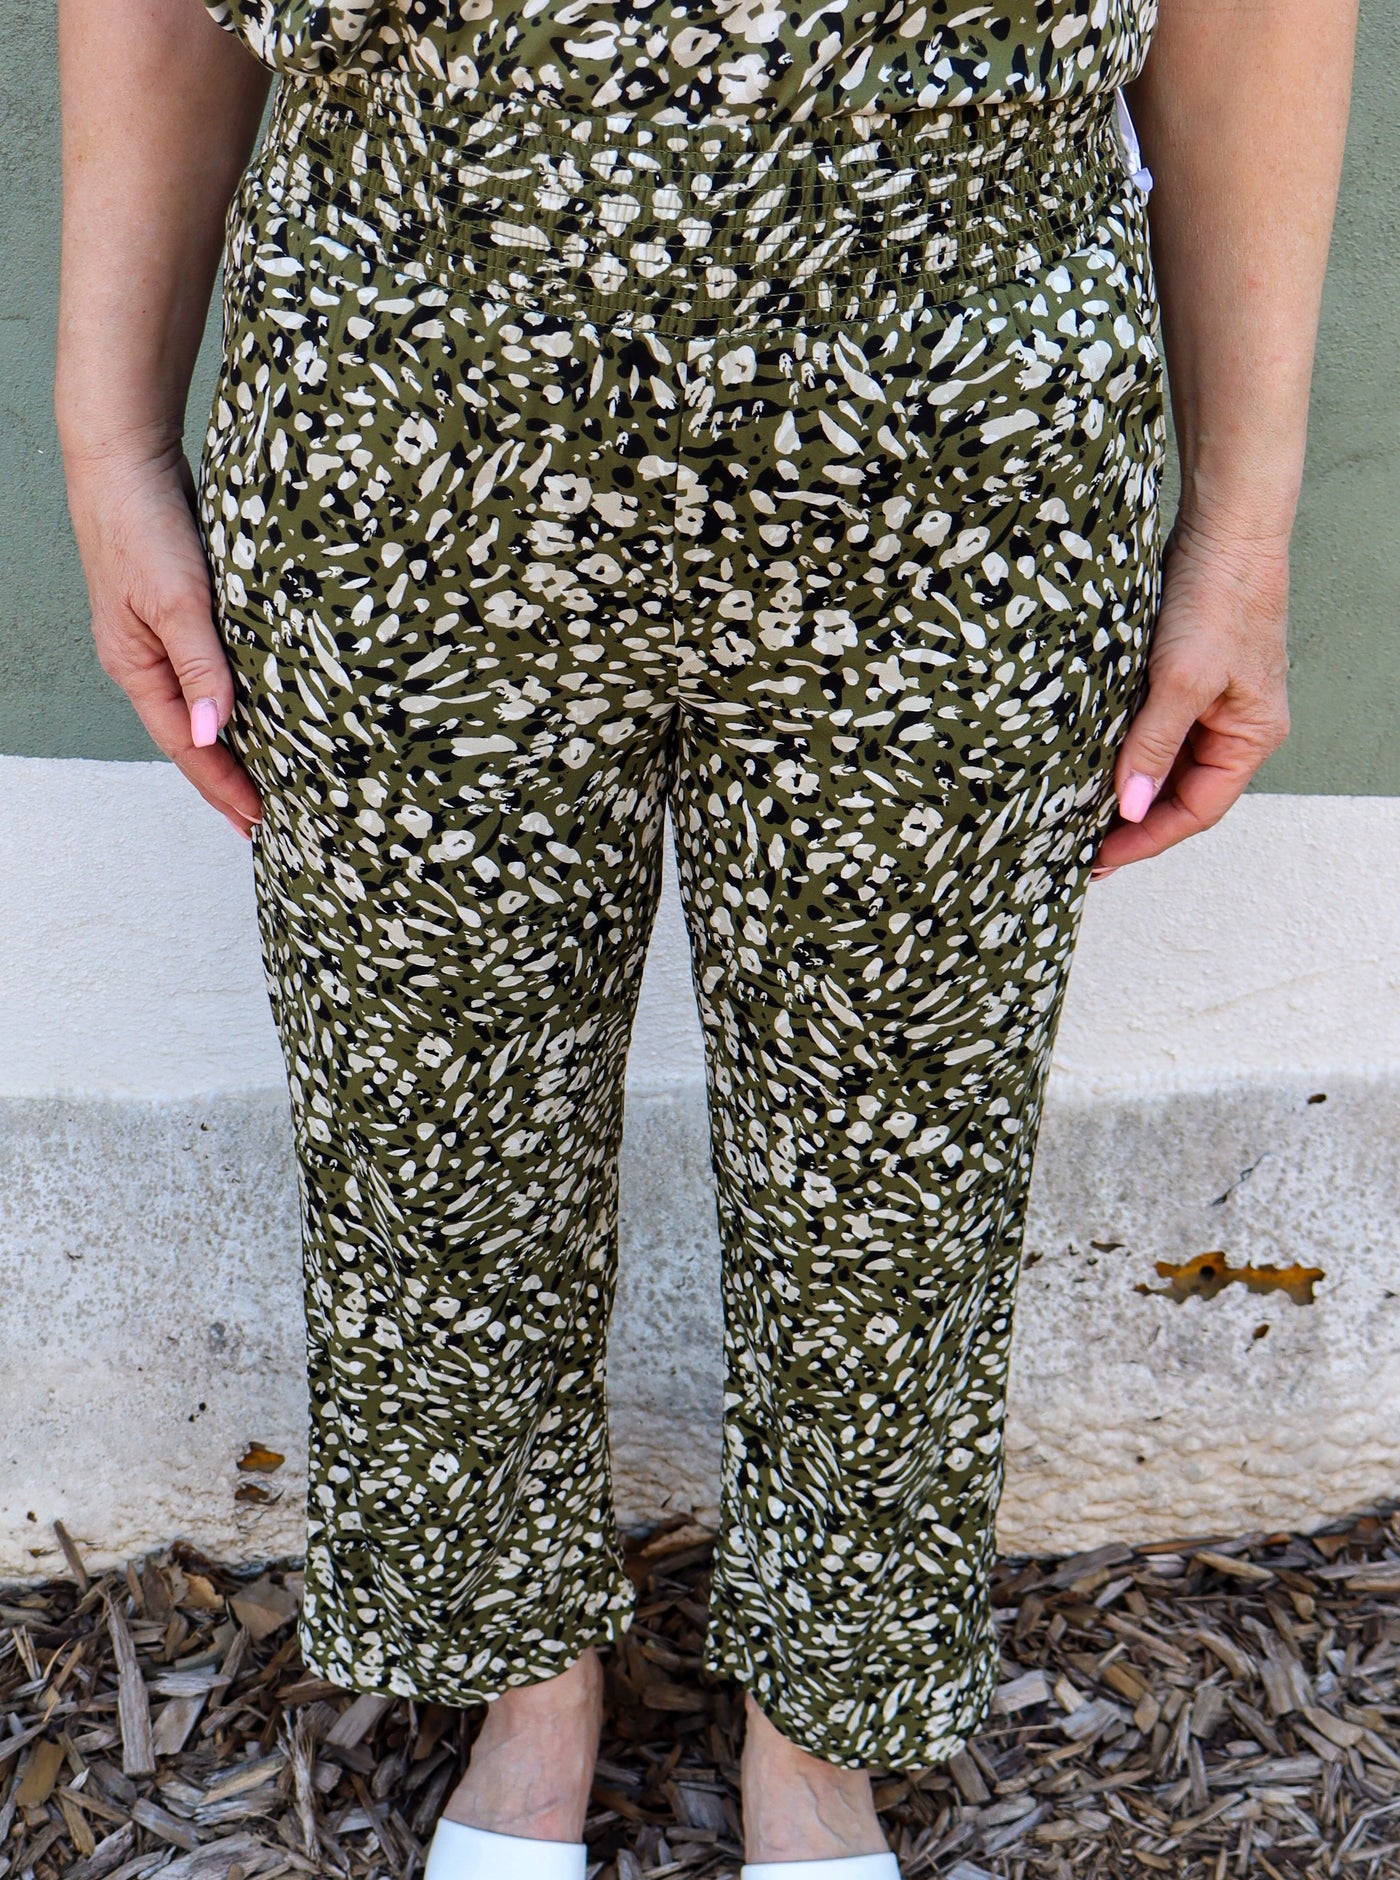 Model is wearing a green white and black cheetah print pull on pant paired with a matching cami.